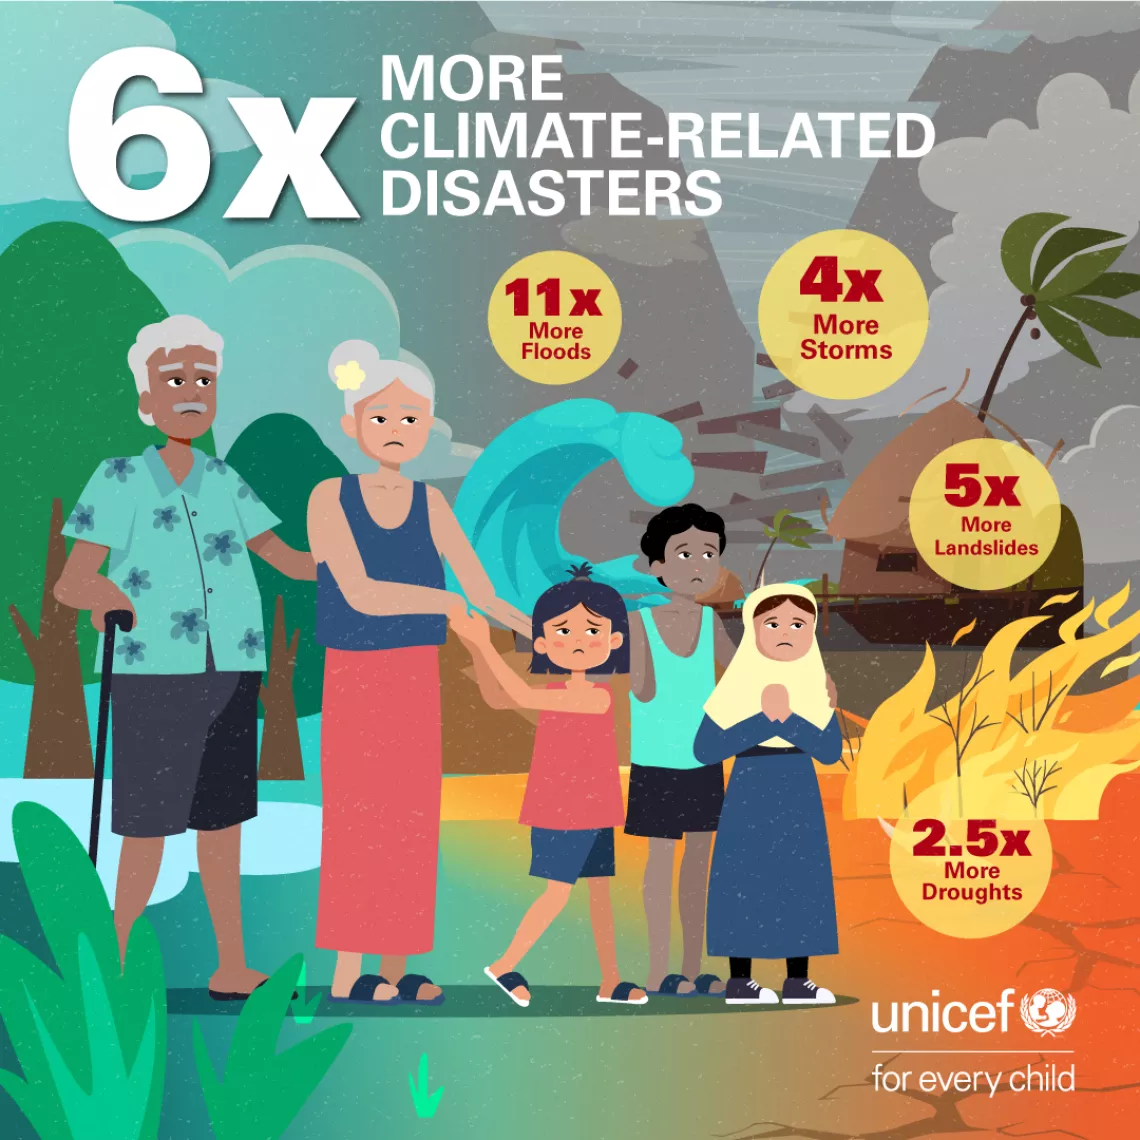 Social media card showing that children in the East Asia and Pacific region experience 6 times more climate-related disasters today compared to their grandparents 50 years ago